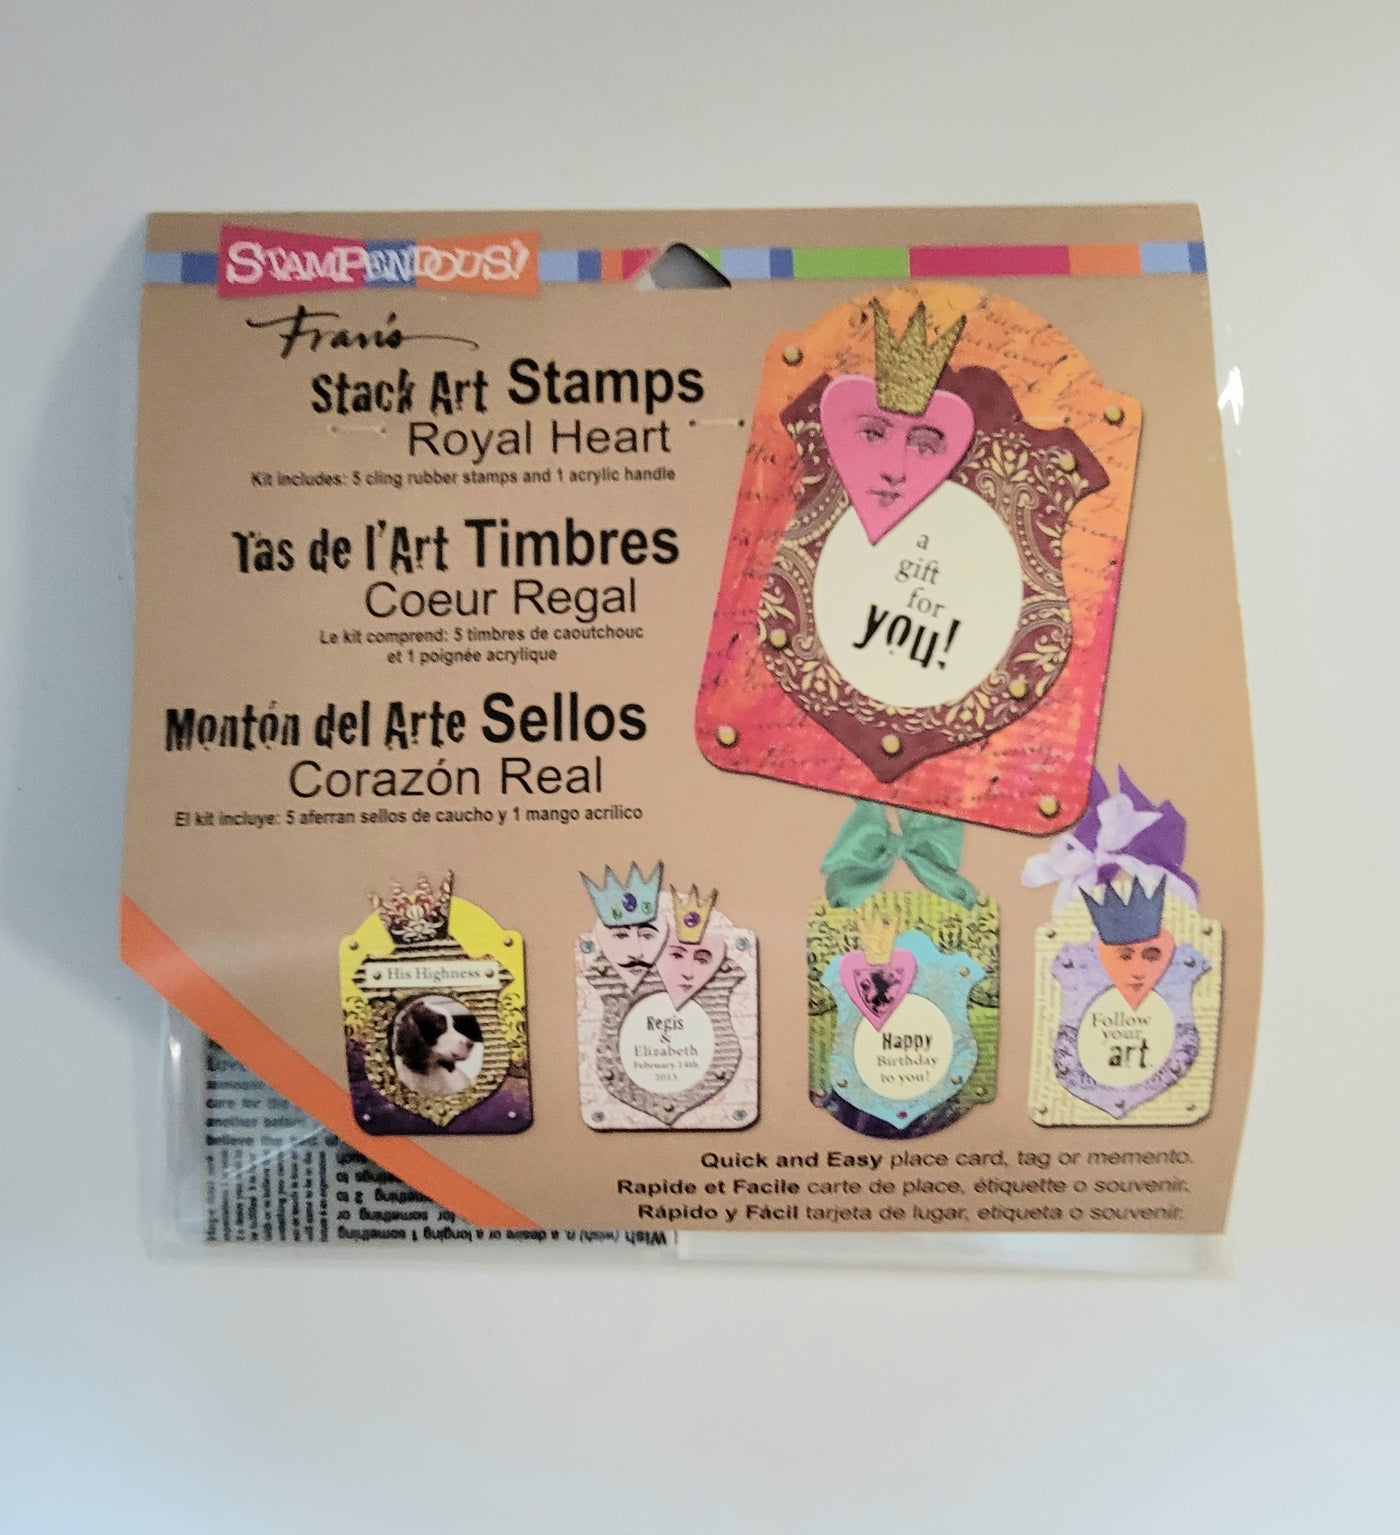 Rubber Heart Stamps 